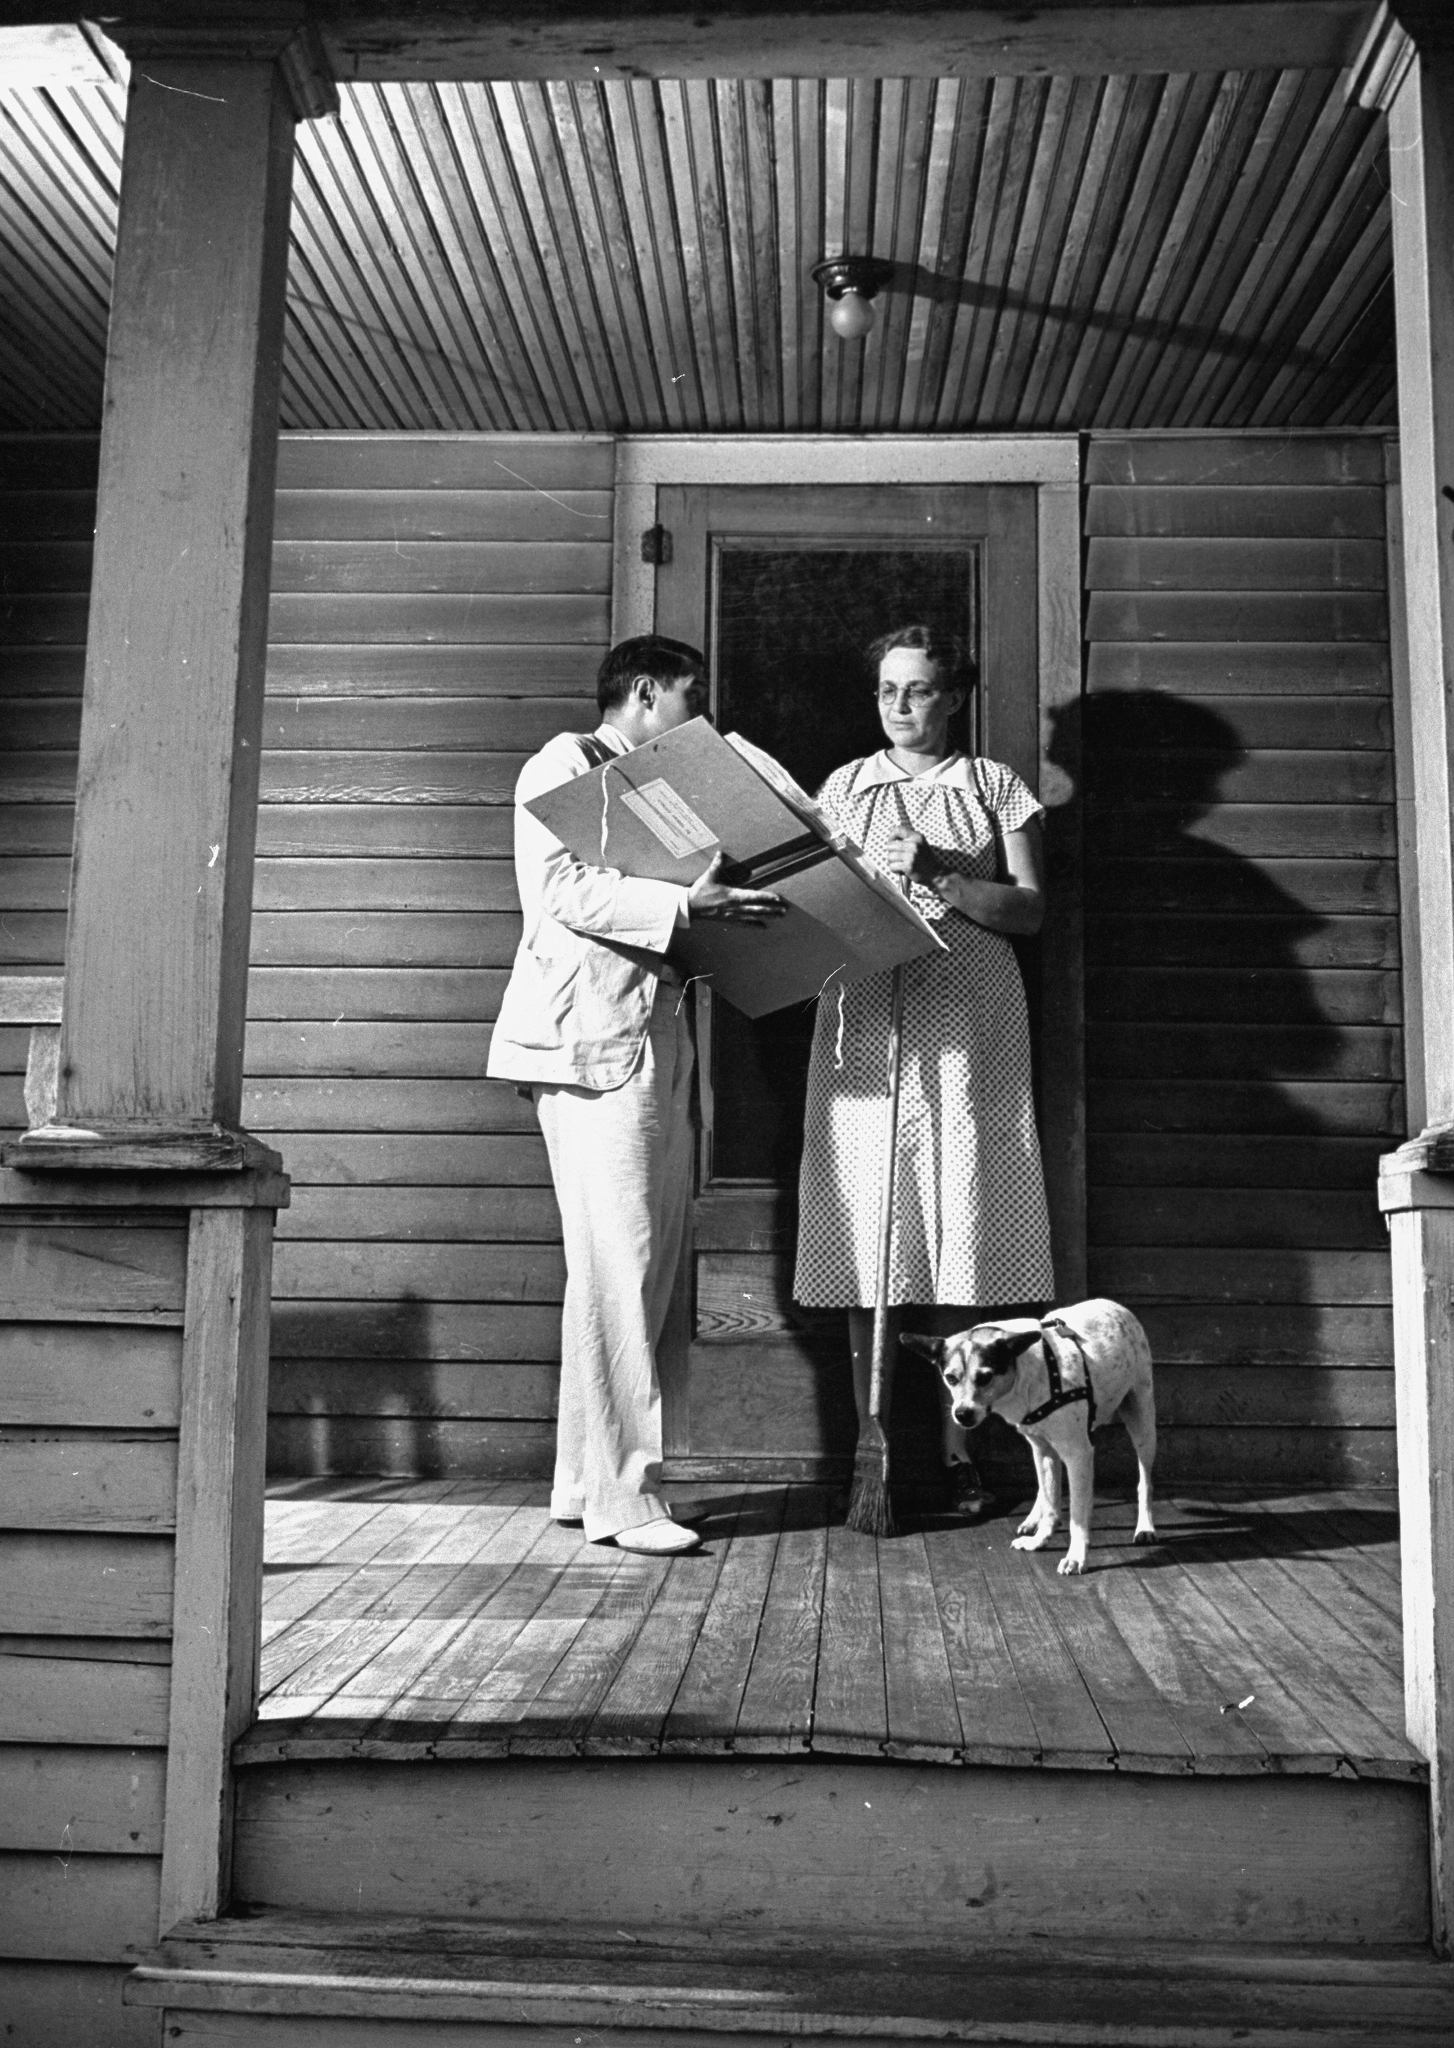 Census taker talking with a housewife on porch of her home, c. 1940. (Hansel Mieth—The LIFE Picture Collection / Getty Images)